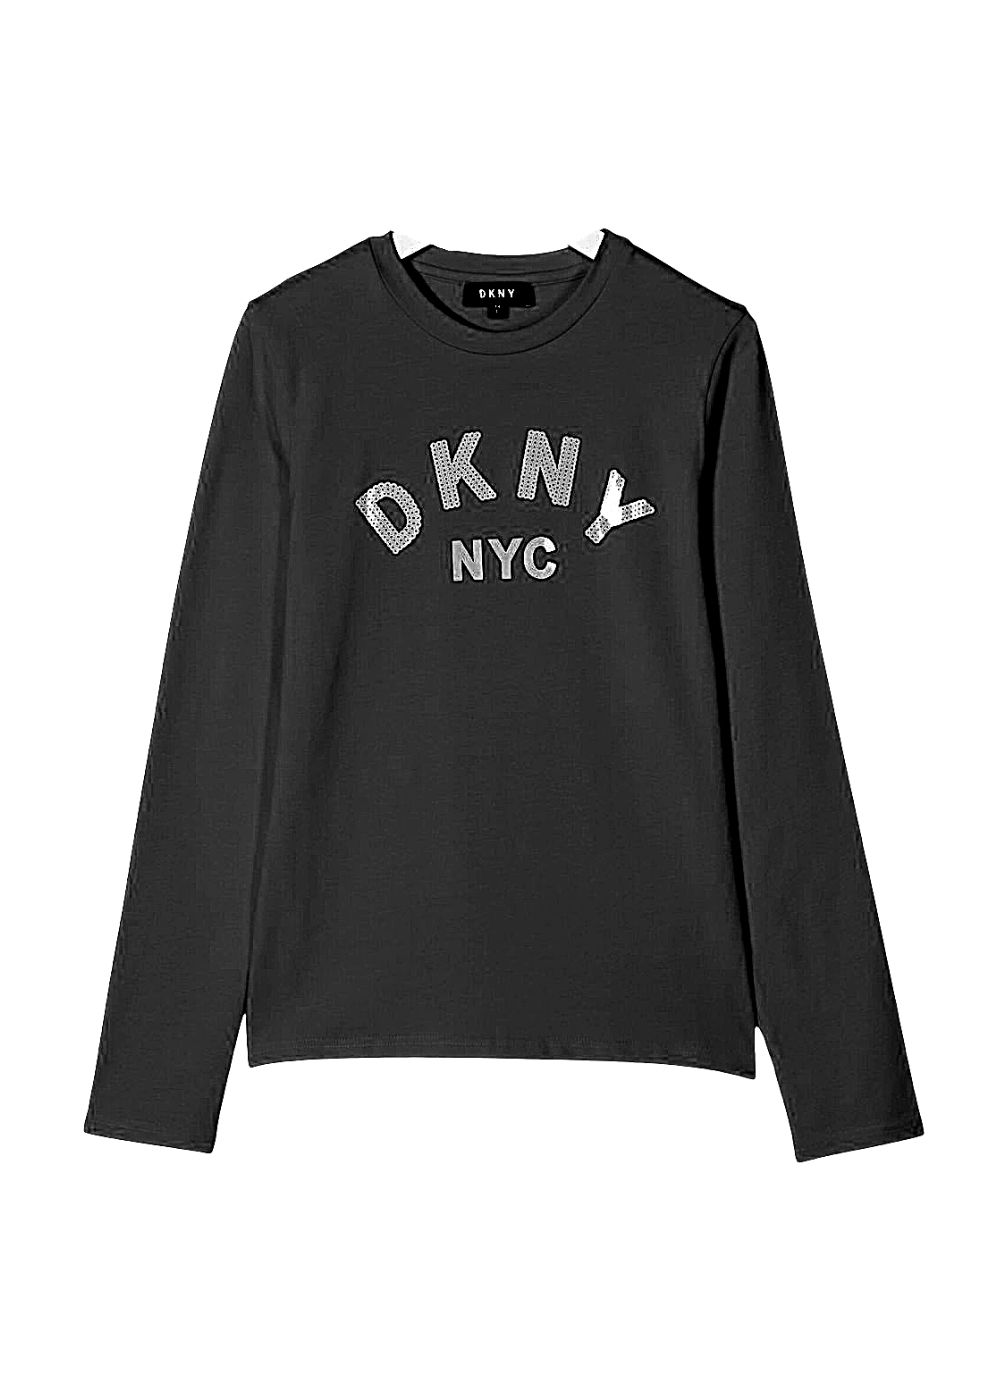 Featured image for “DKNY T-SHIRT NERA CON STAMPA”